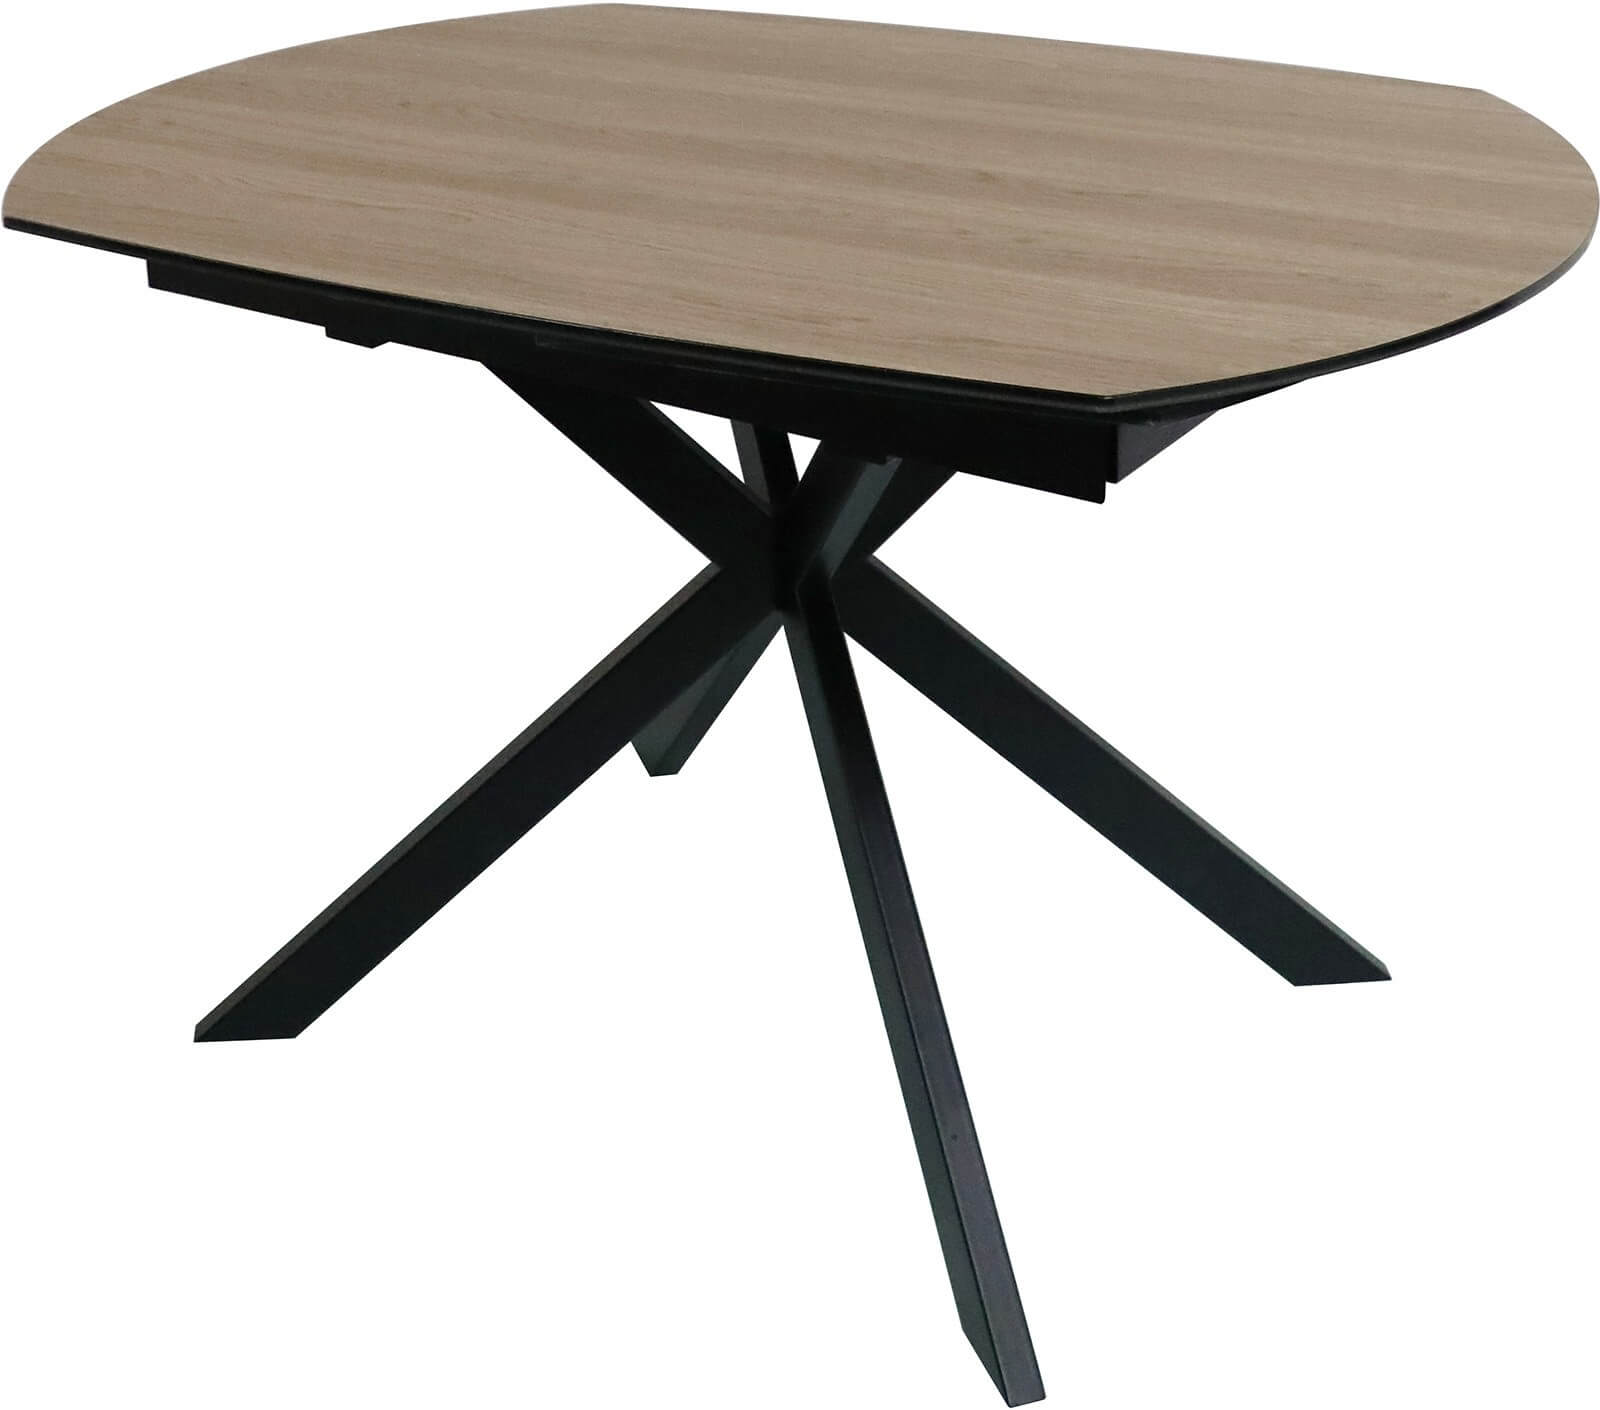 Showing image for Detroit motion dining table